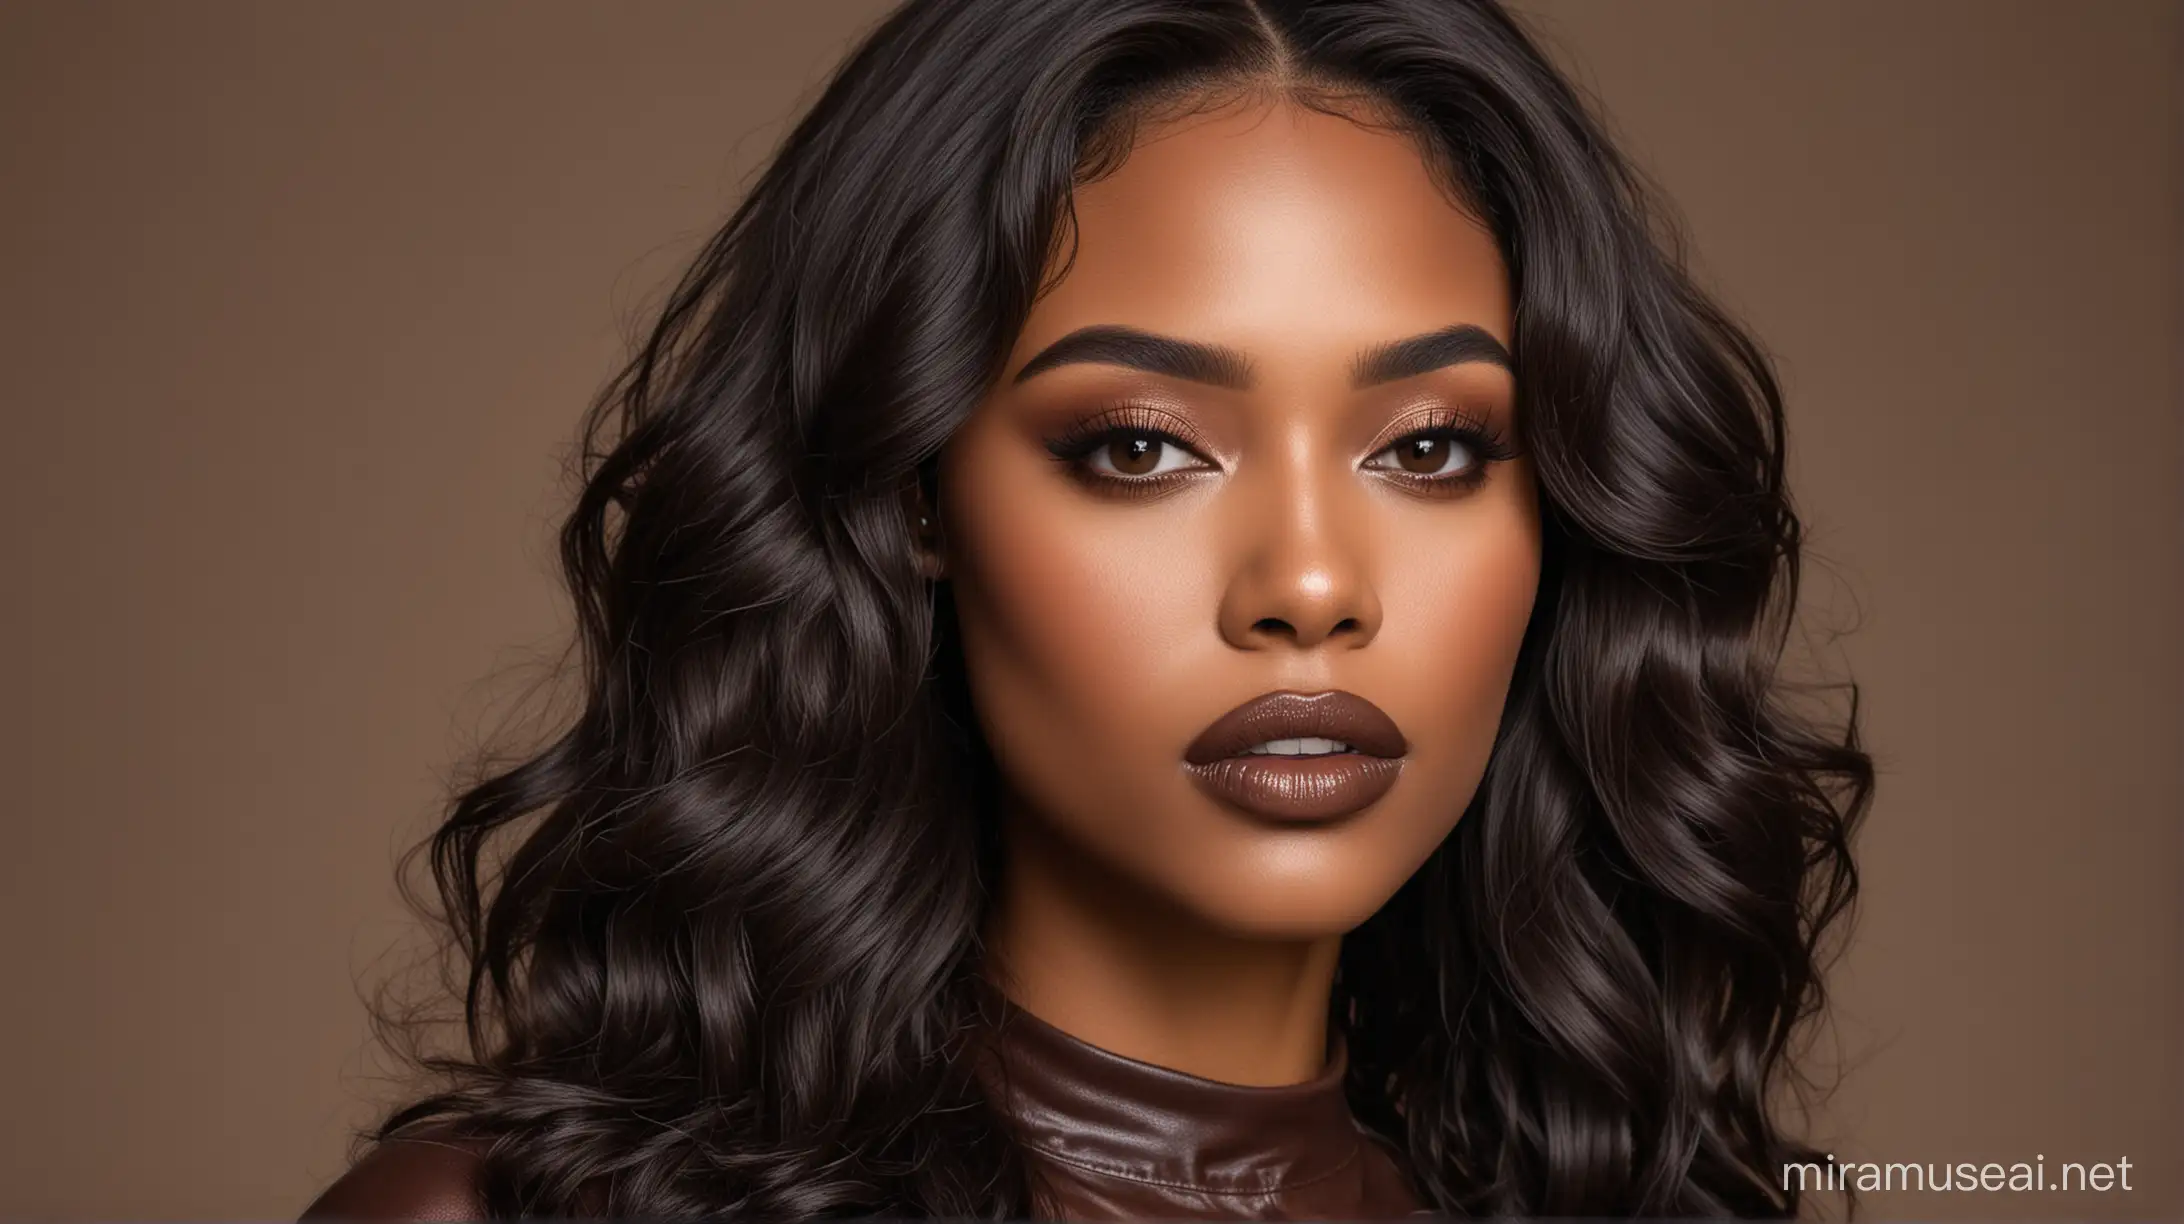 Stylish Black Woman with Wavy Hairstyle in Chocolate Brown Leather Top